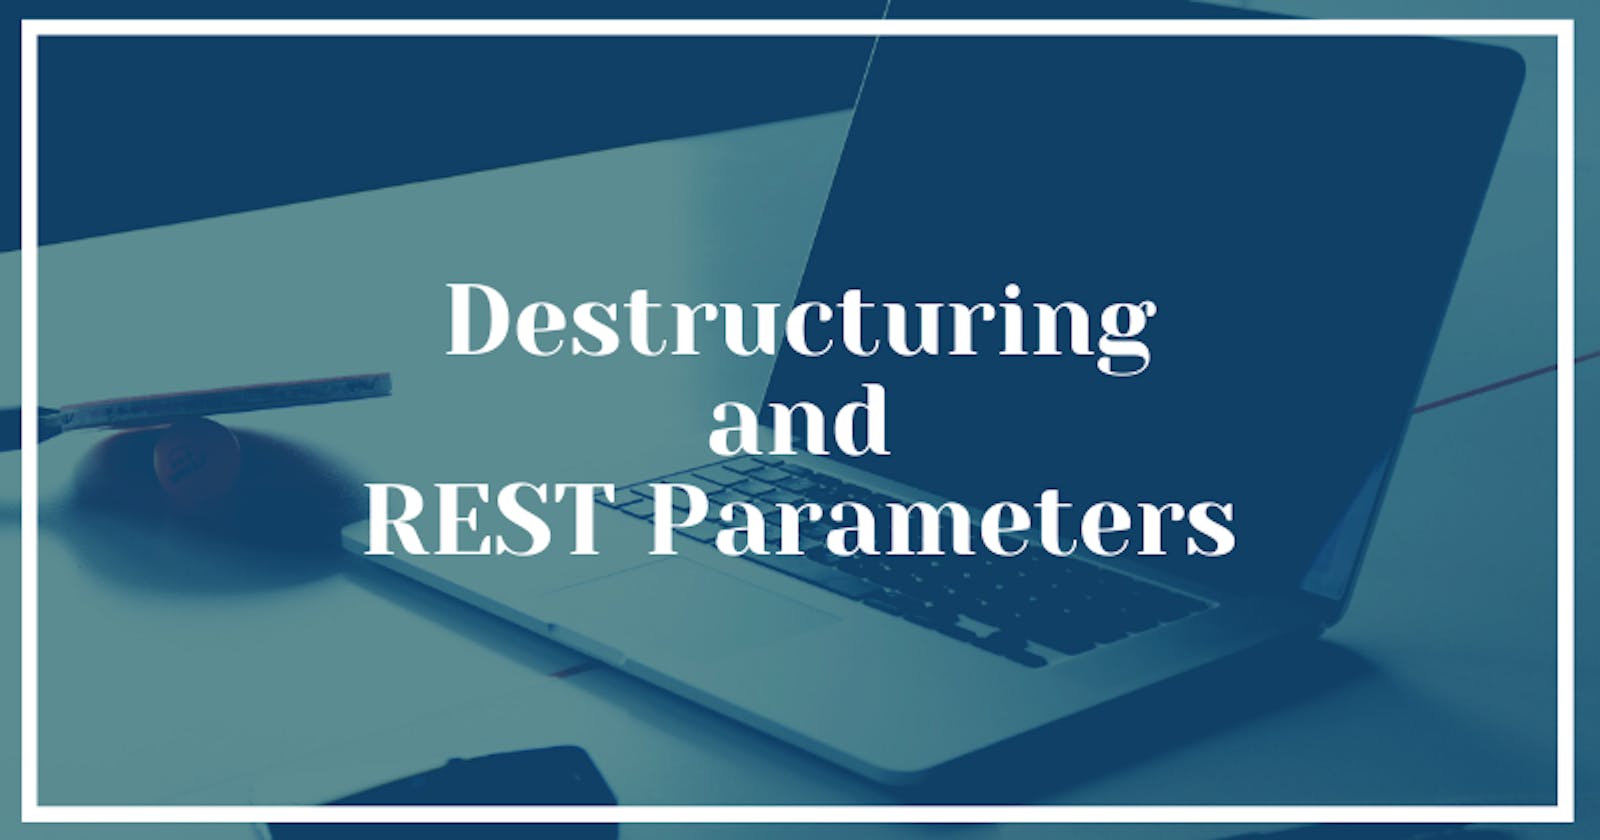 Destructuring and REST Parameters